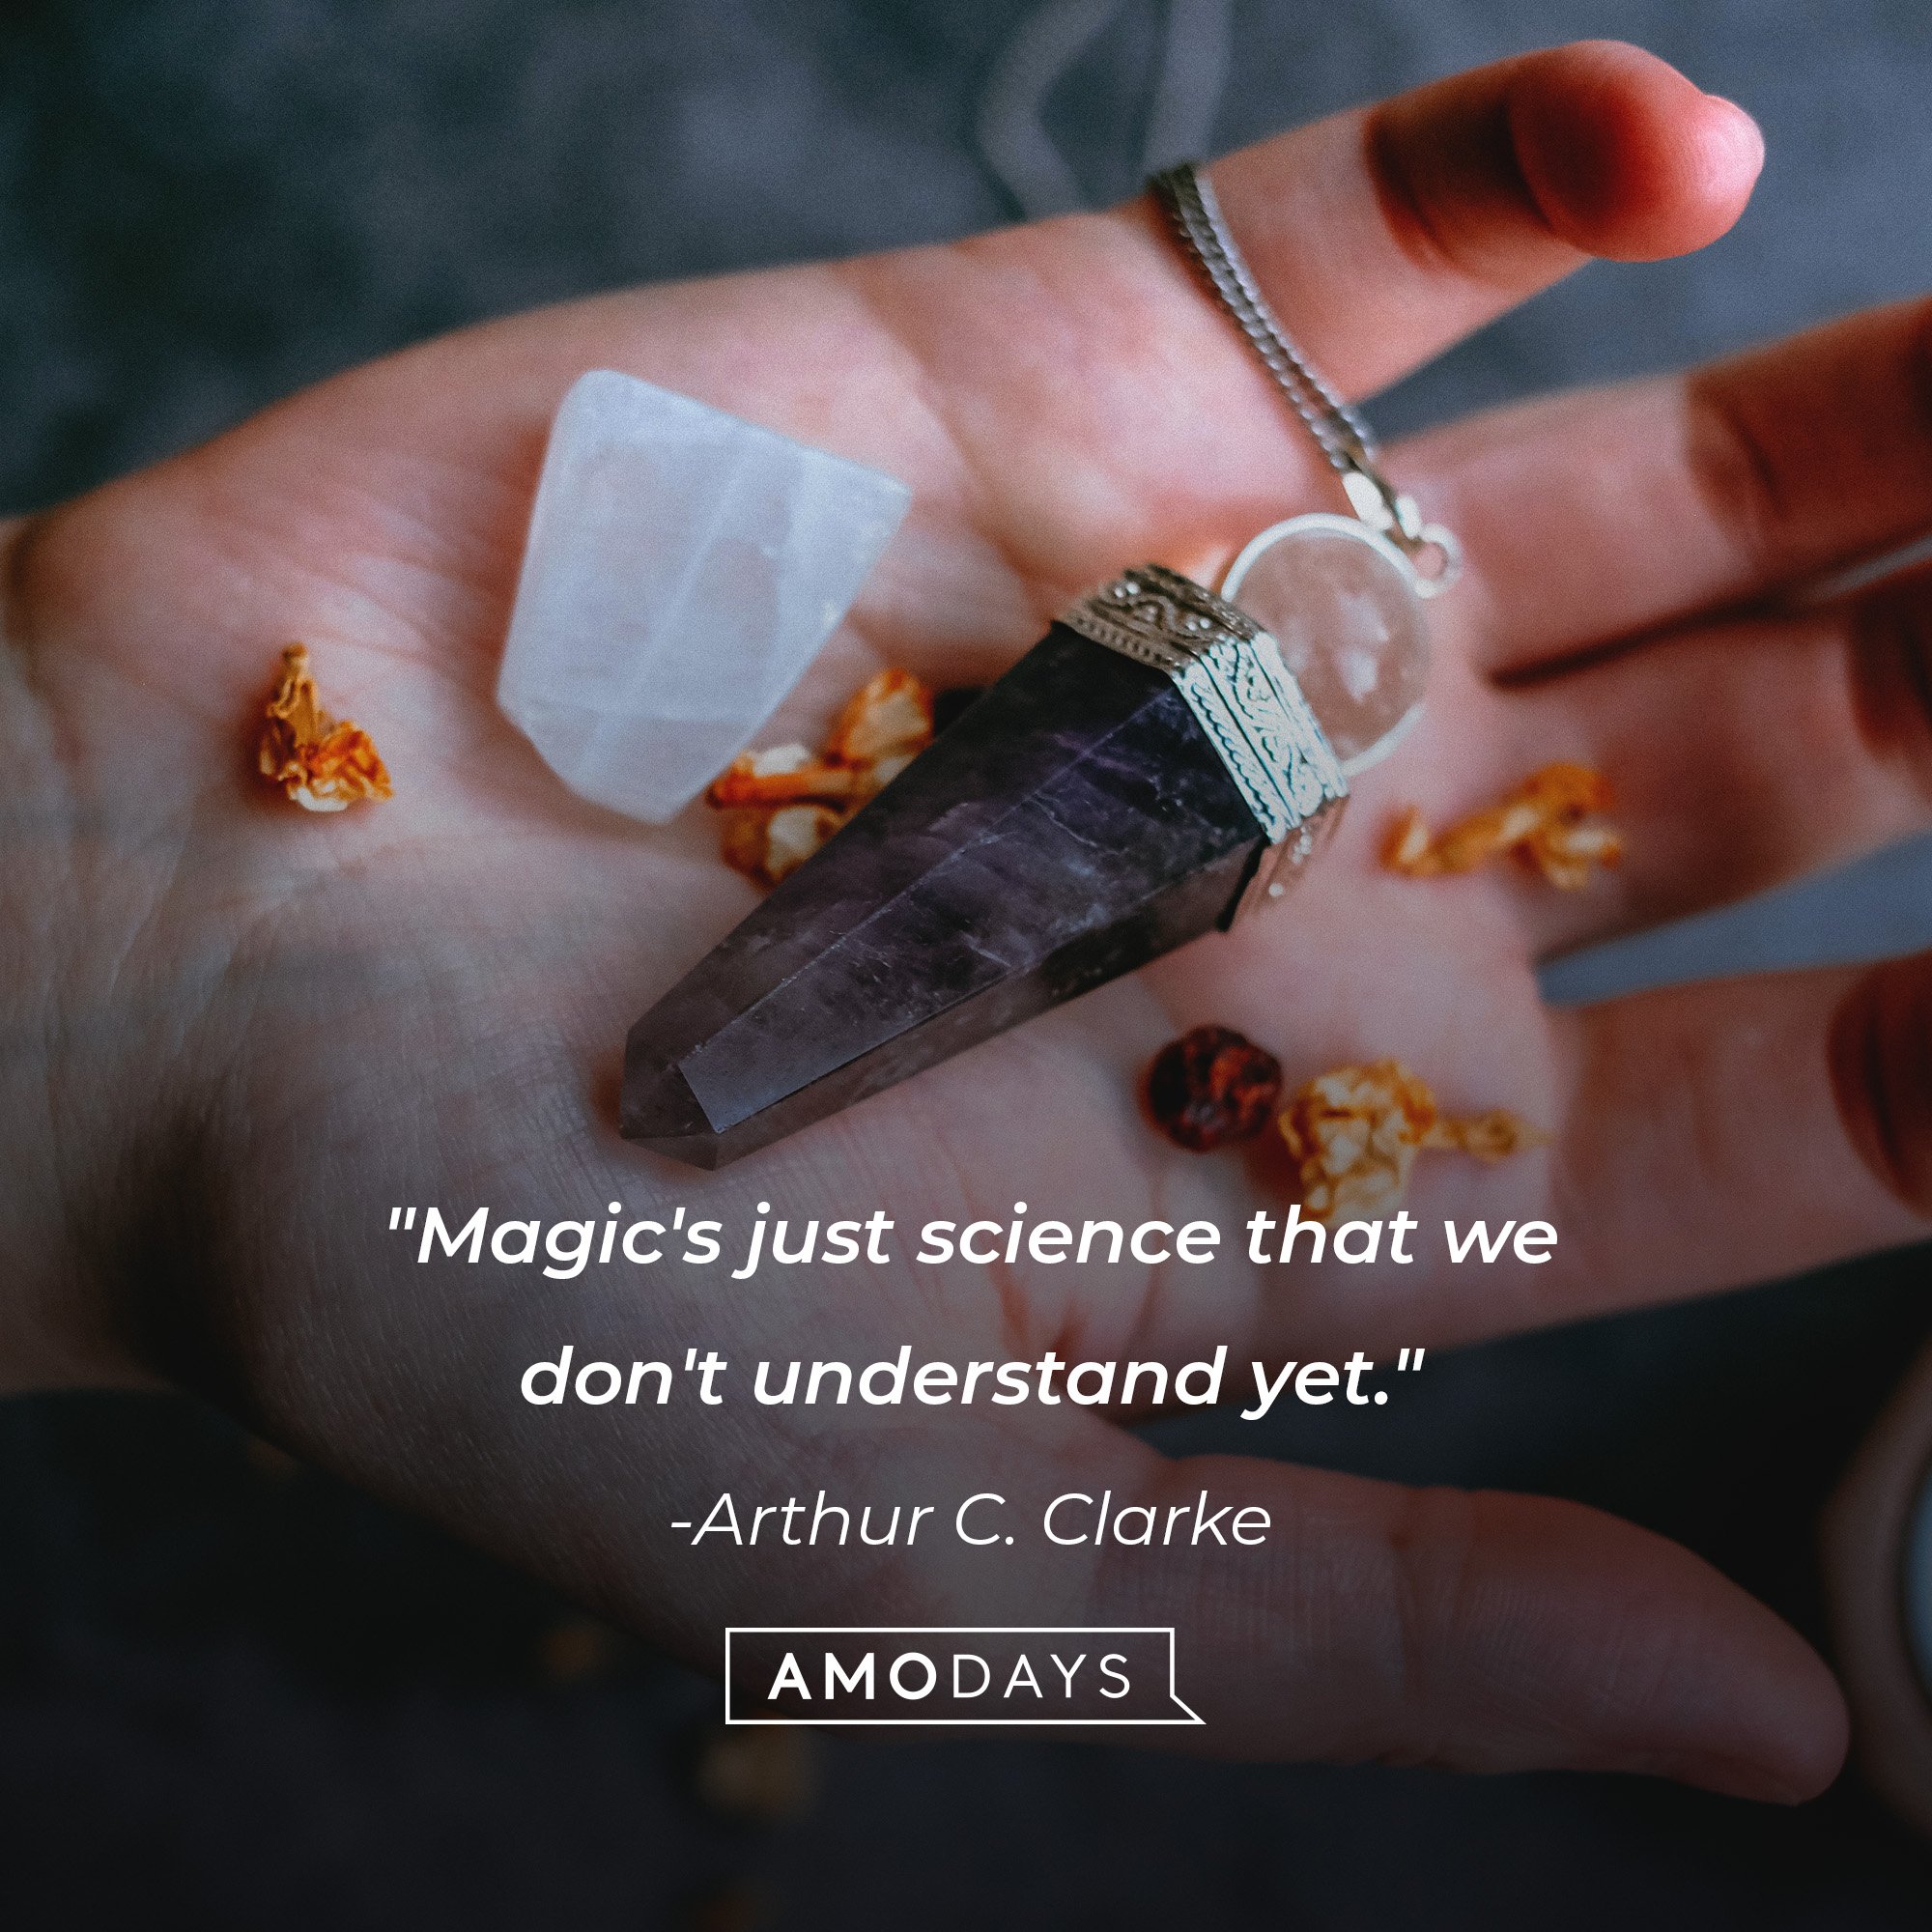 Arthur C. Clarke’s quote: "Magic's just science that we don't understand yet." | Image: AmoDays